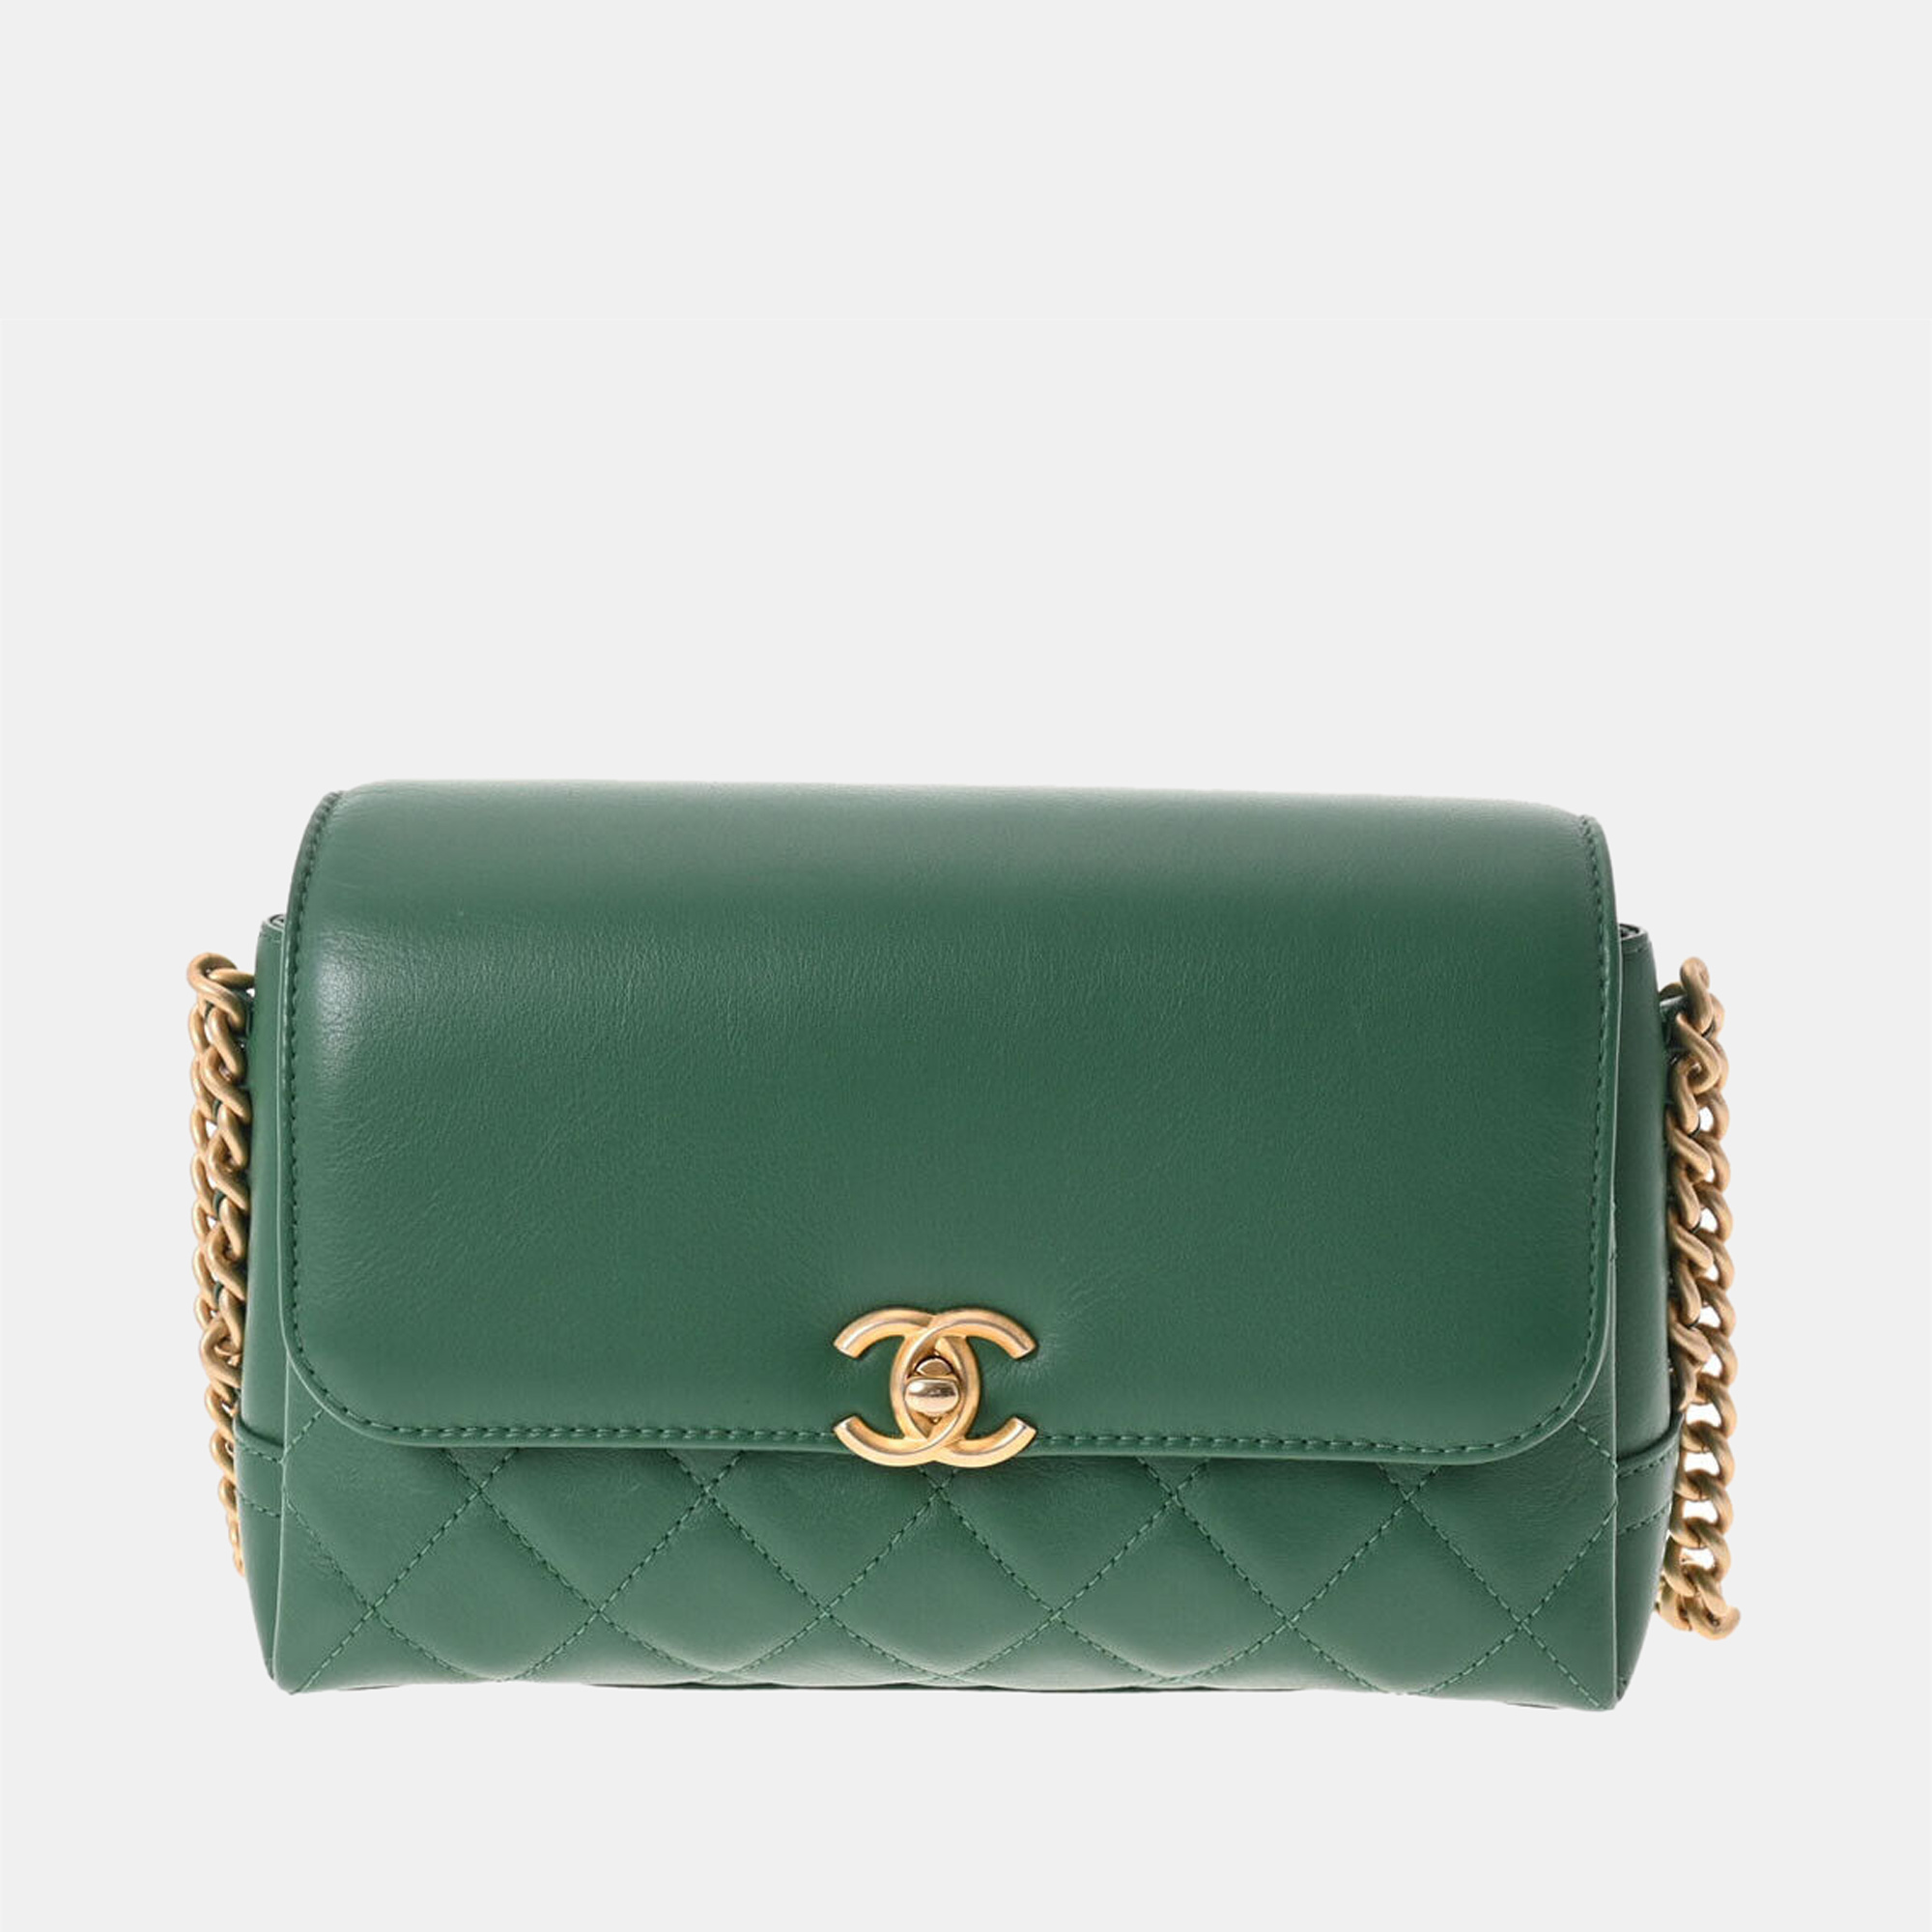 Pre-owned Chanel Green Lambskin Leather Cc Shoulder Bag